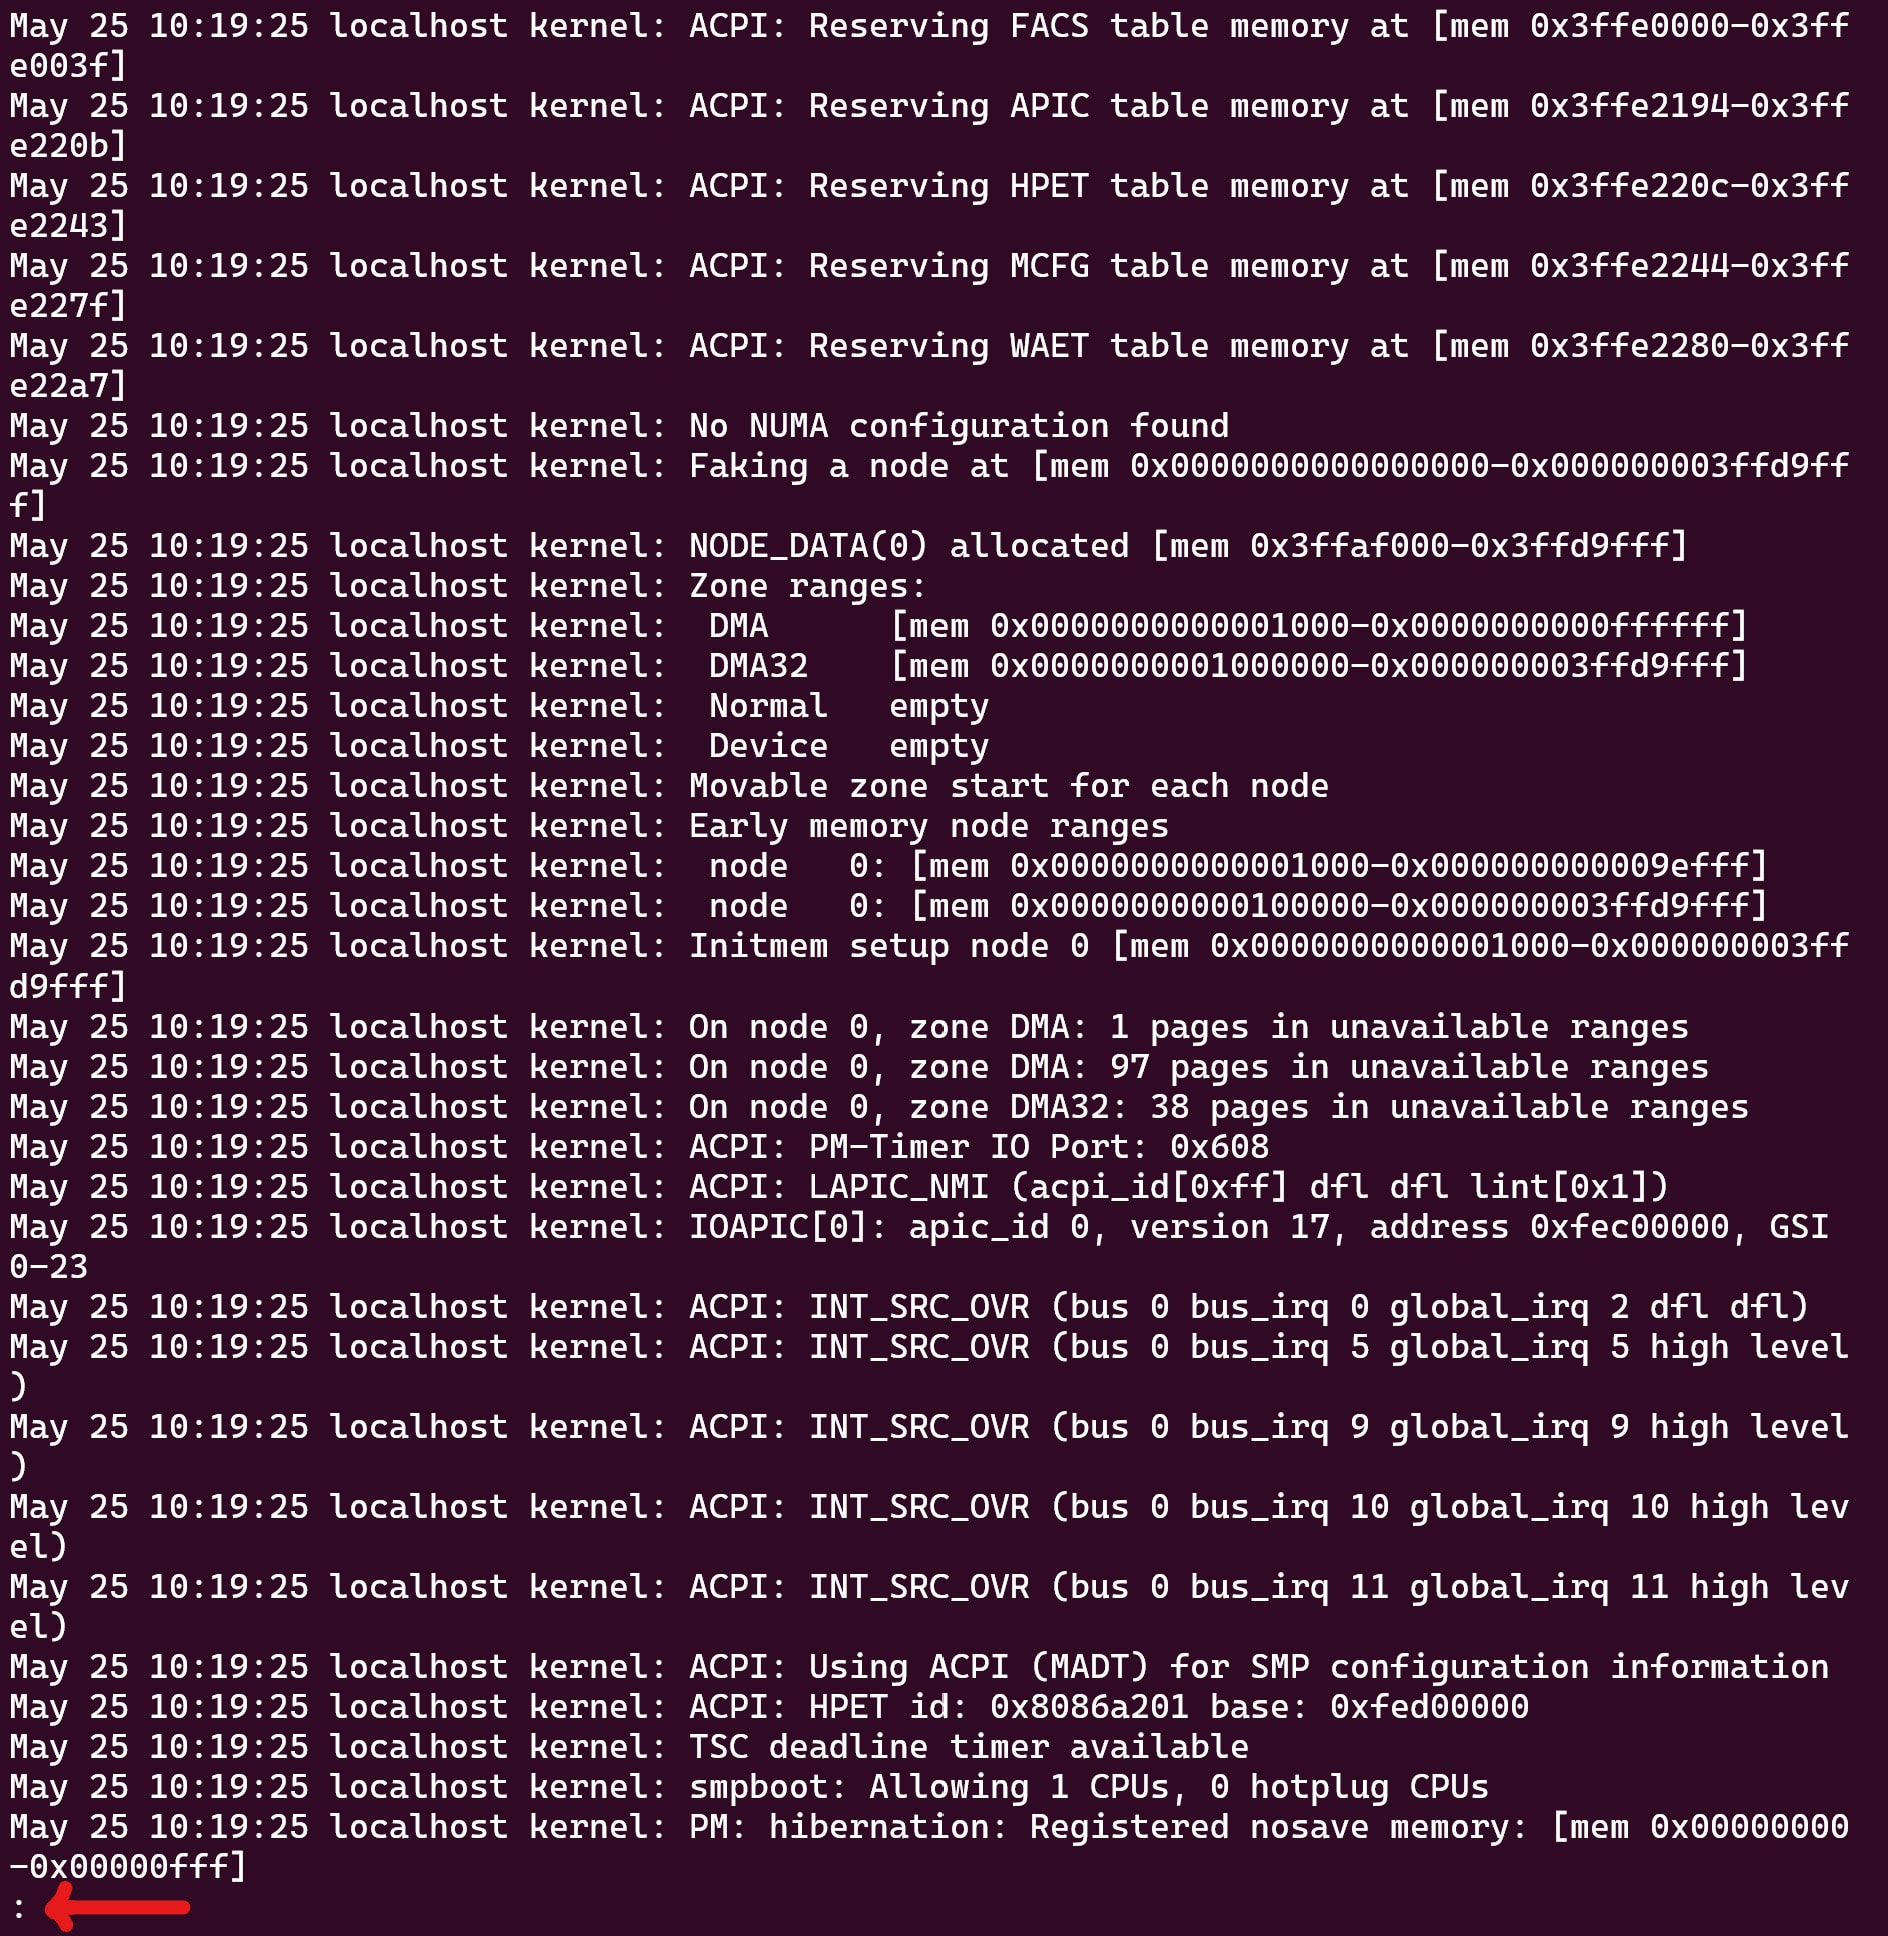 Screenshot showing the results of the less /var/log/messages command.